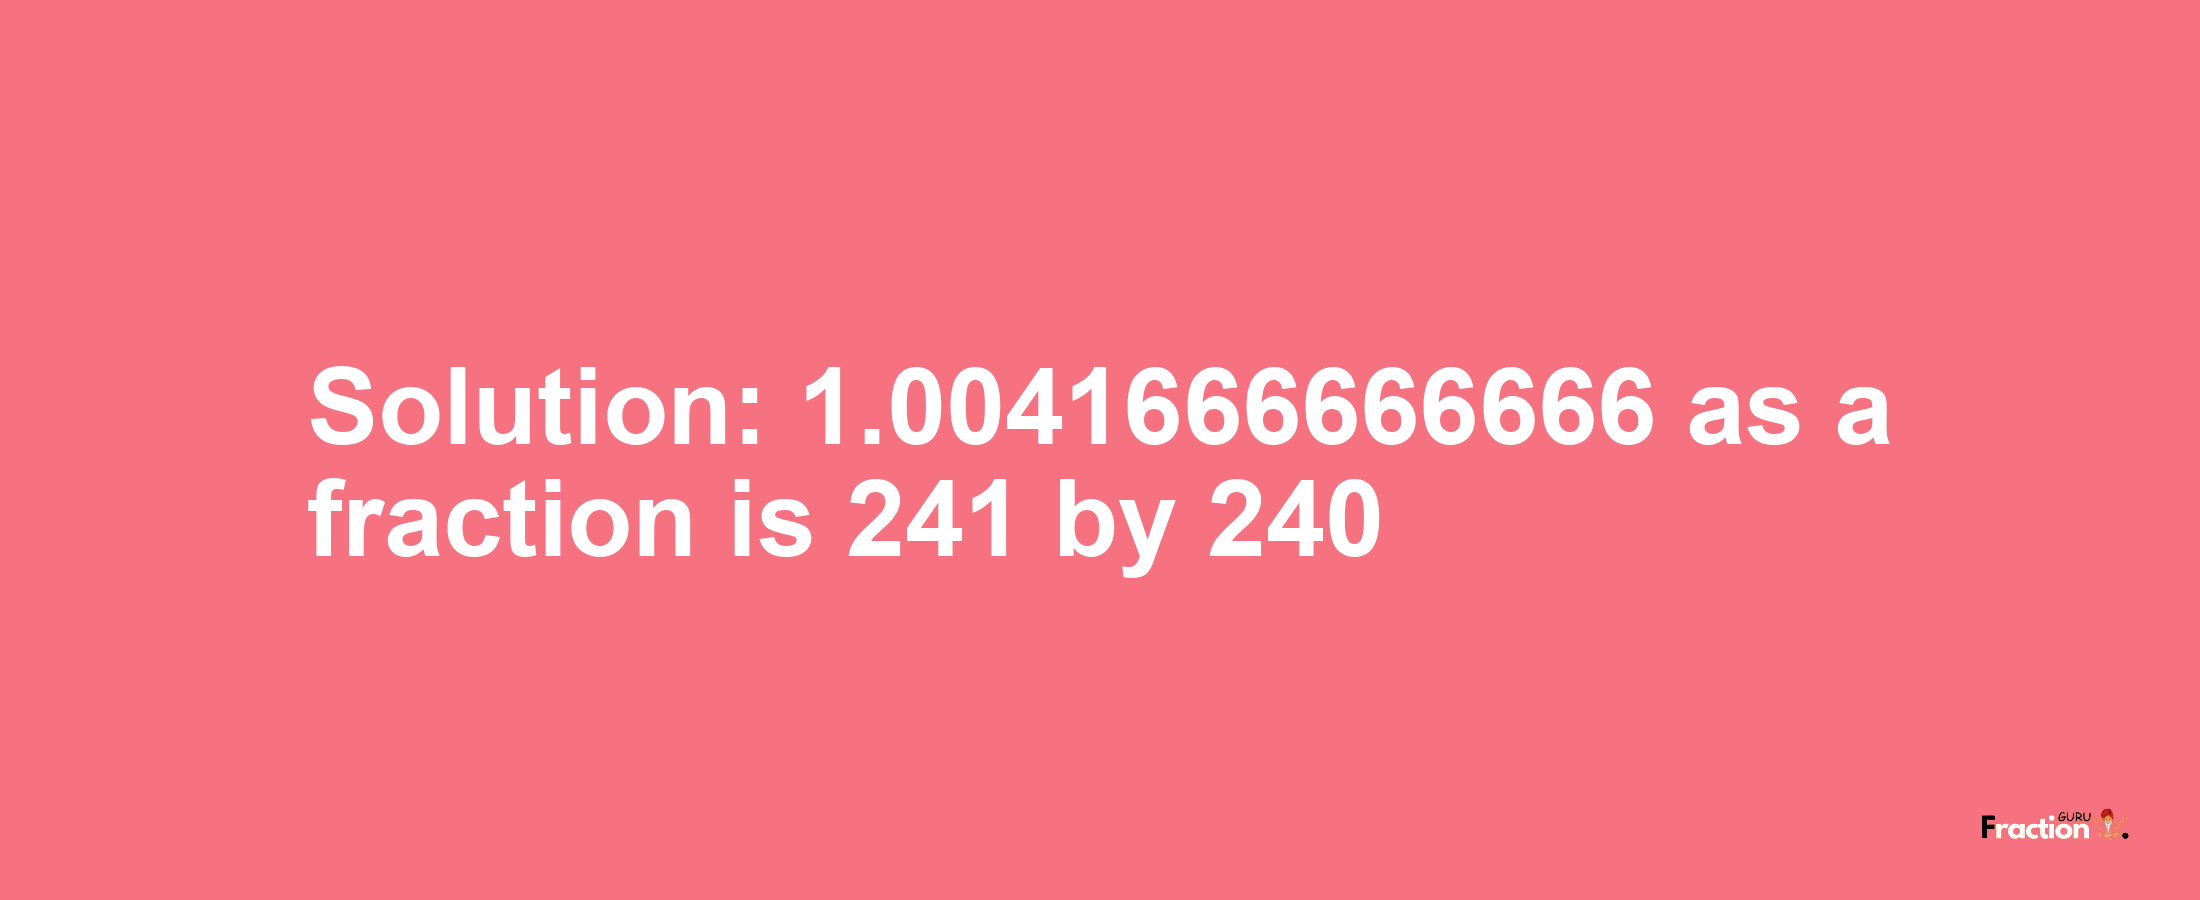 Solution:1.0041666666666 as a fraction is 241/240